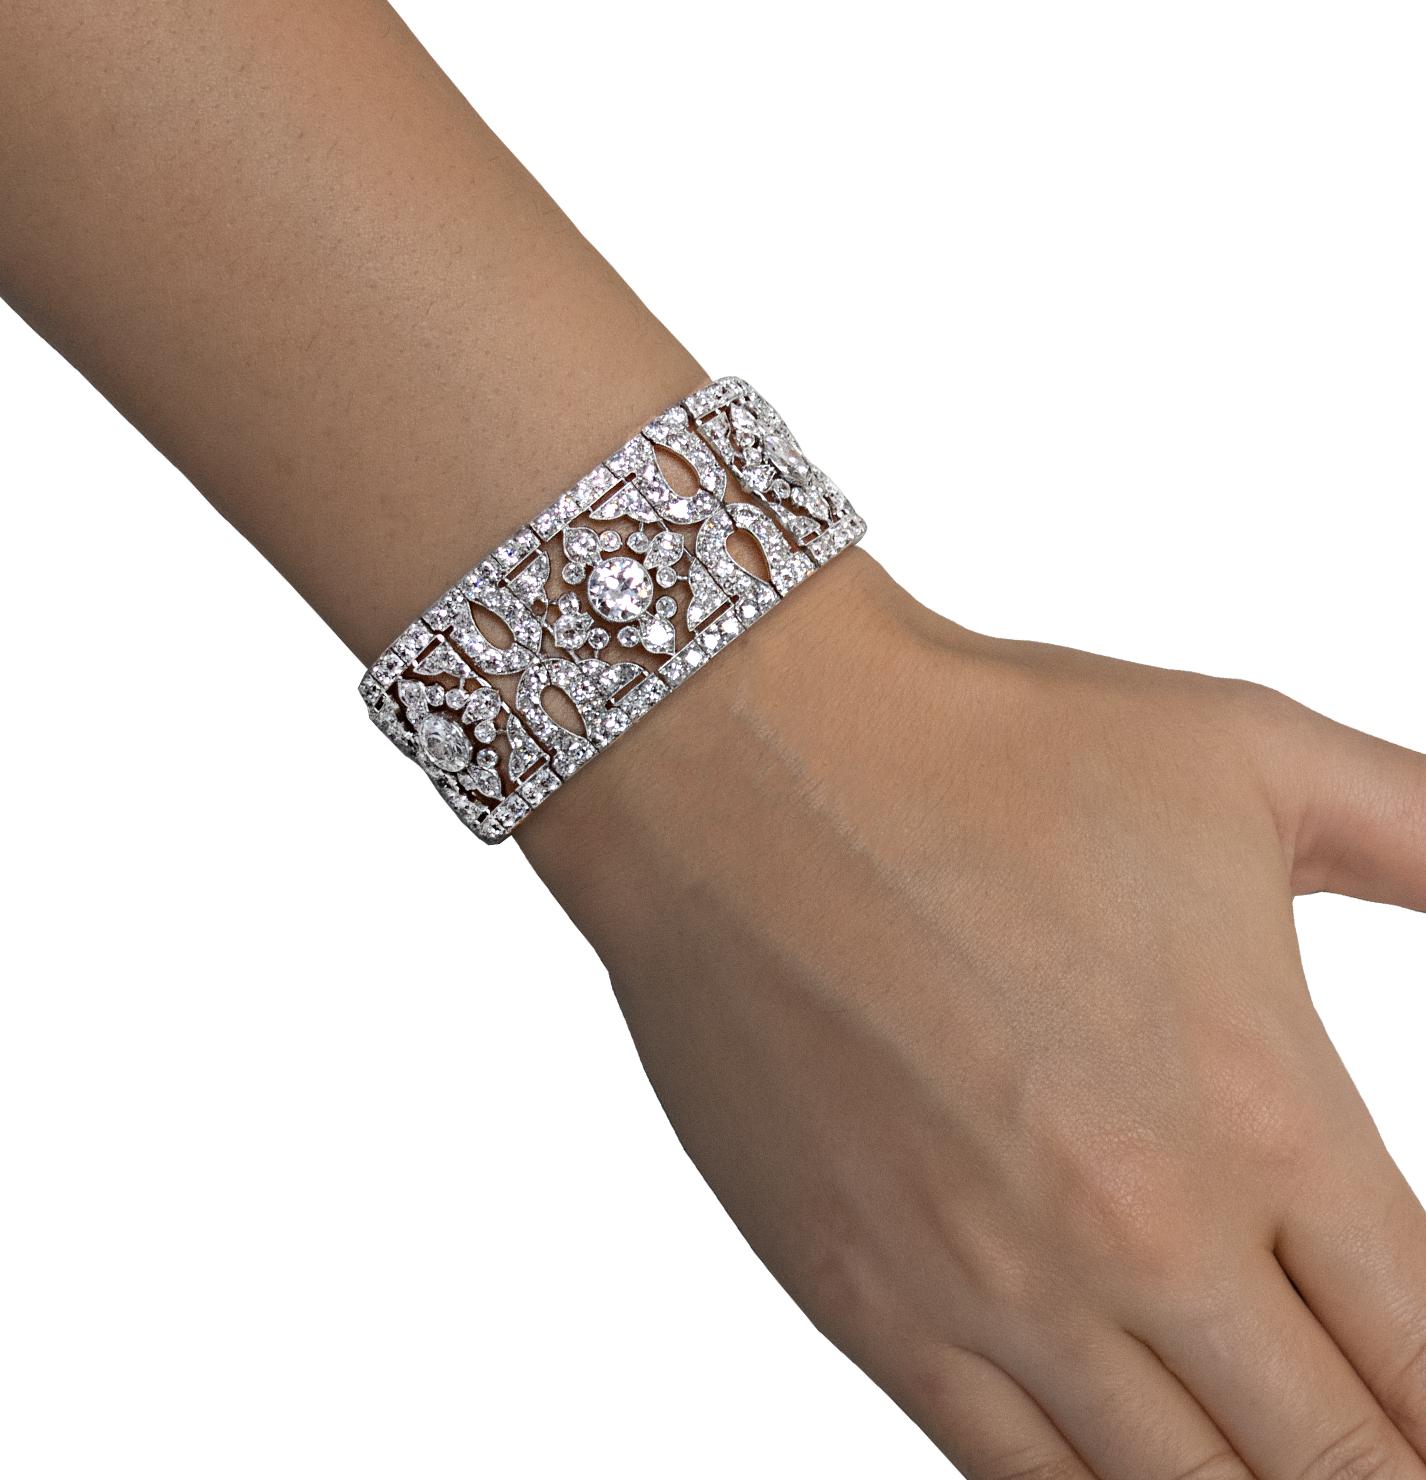 From the House of Cartier, this exquisite Belle Epoque diamond bracelet, Circa 1915, is crafted in platinum and features 389 Old European cut diamonds weighing approximately 40.55 carats total, G-H color, VS-SI clarity. Open metal work links